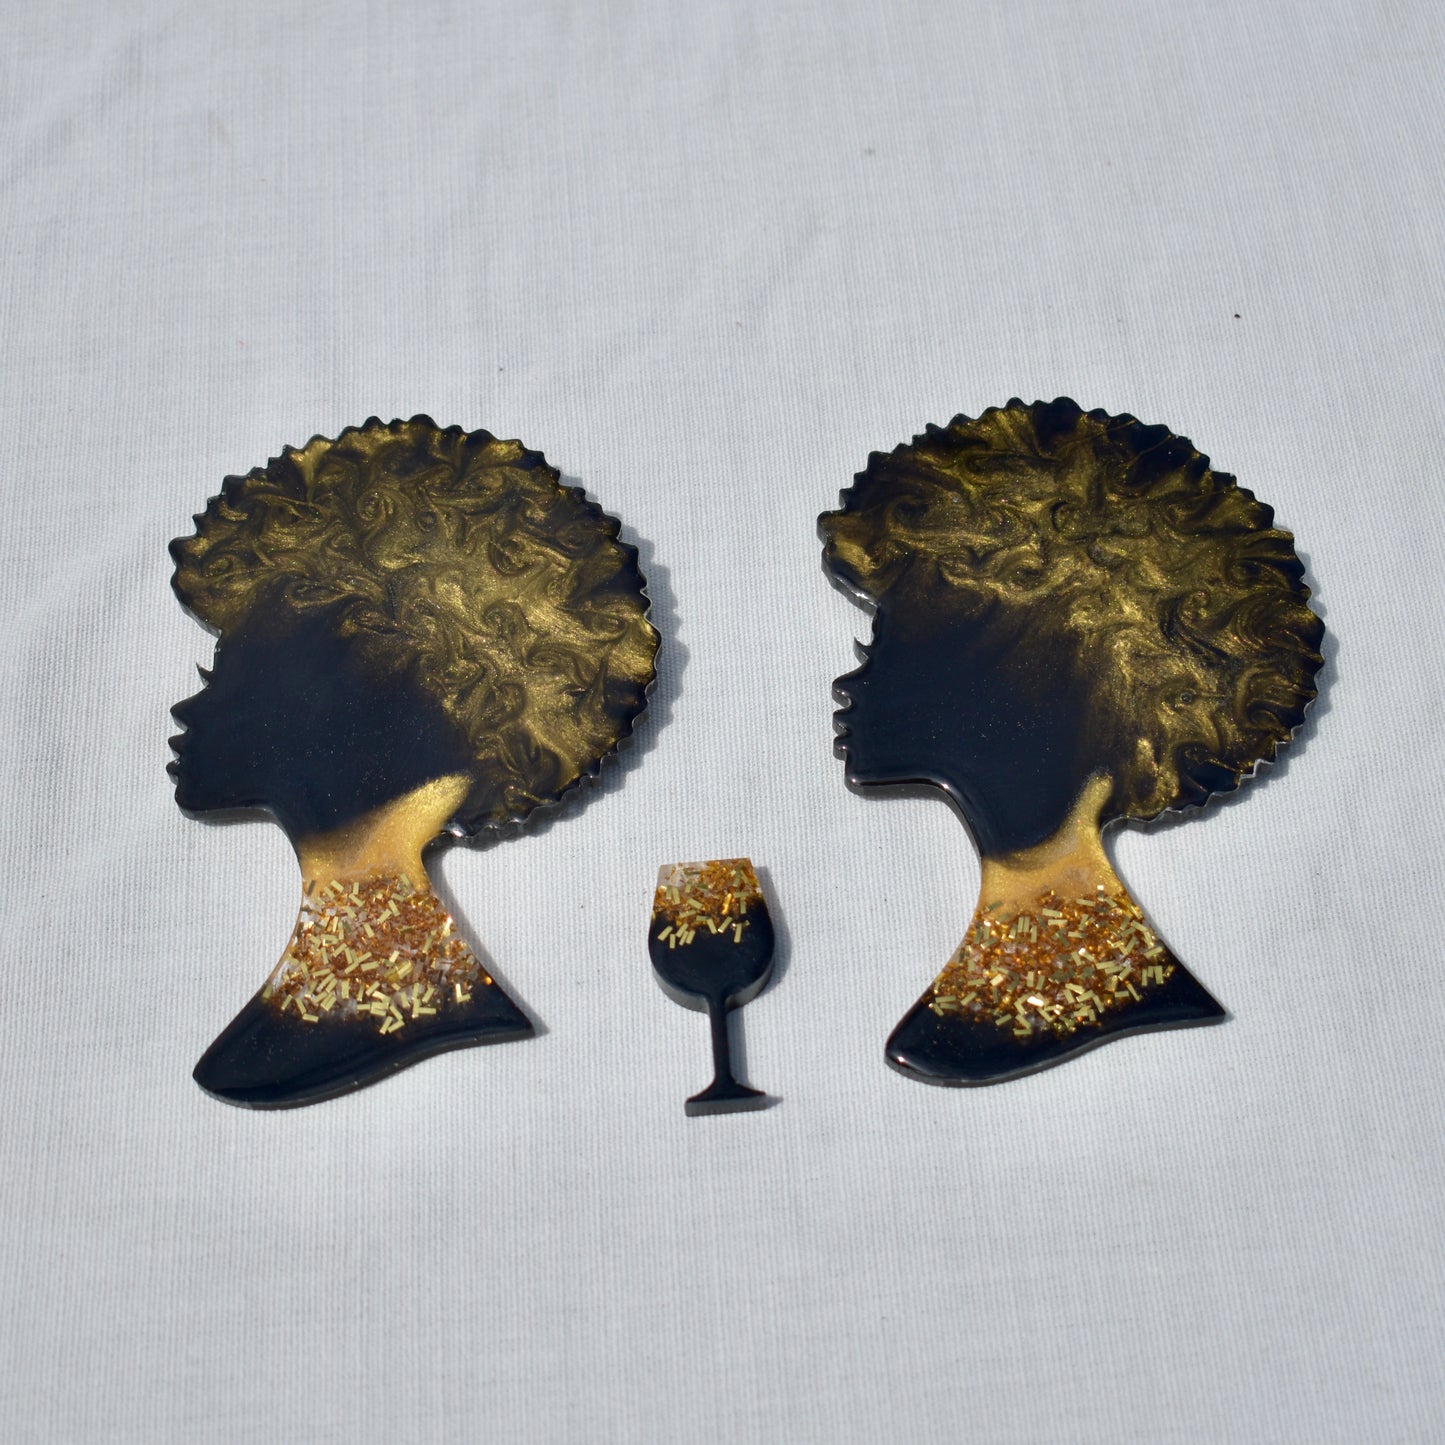 Afro Woman Coasters • Afro Queen Coasters • Afrocentric Gift • Black Girl Magic Coasters